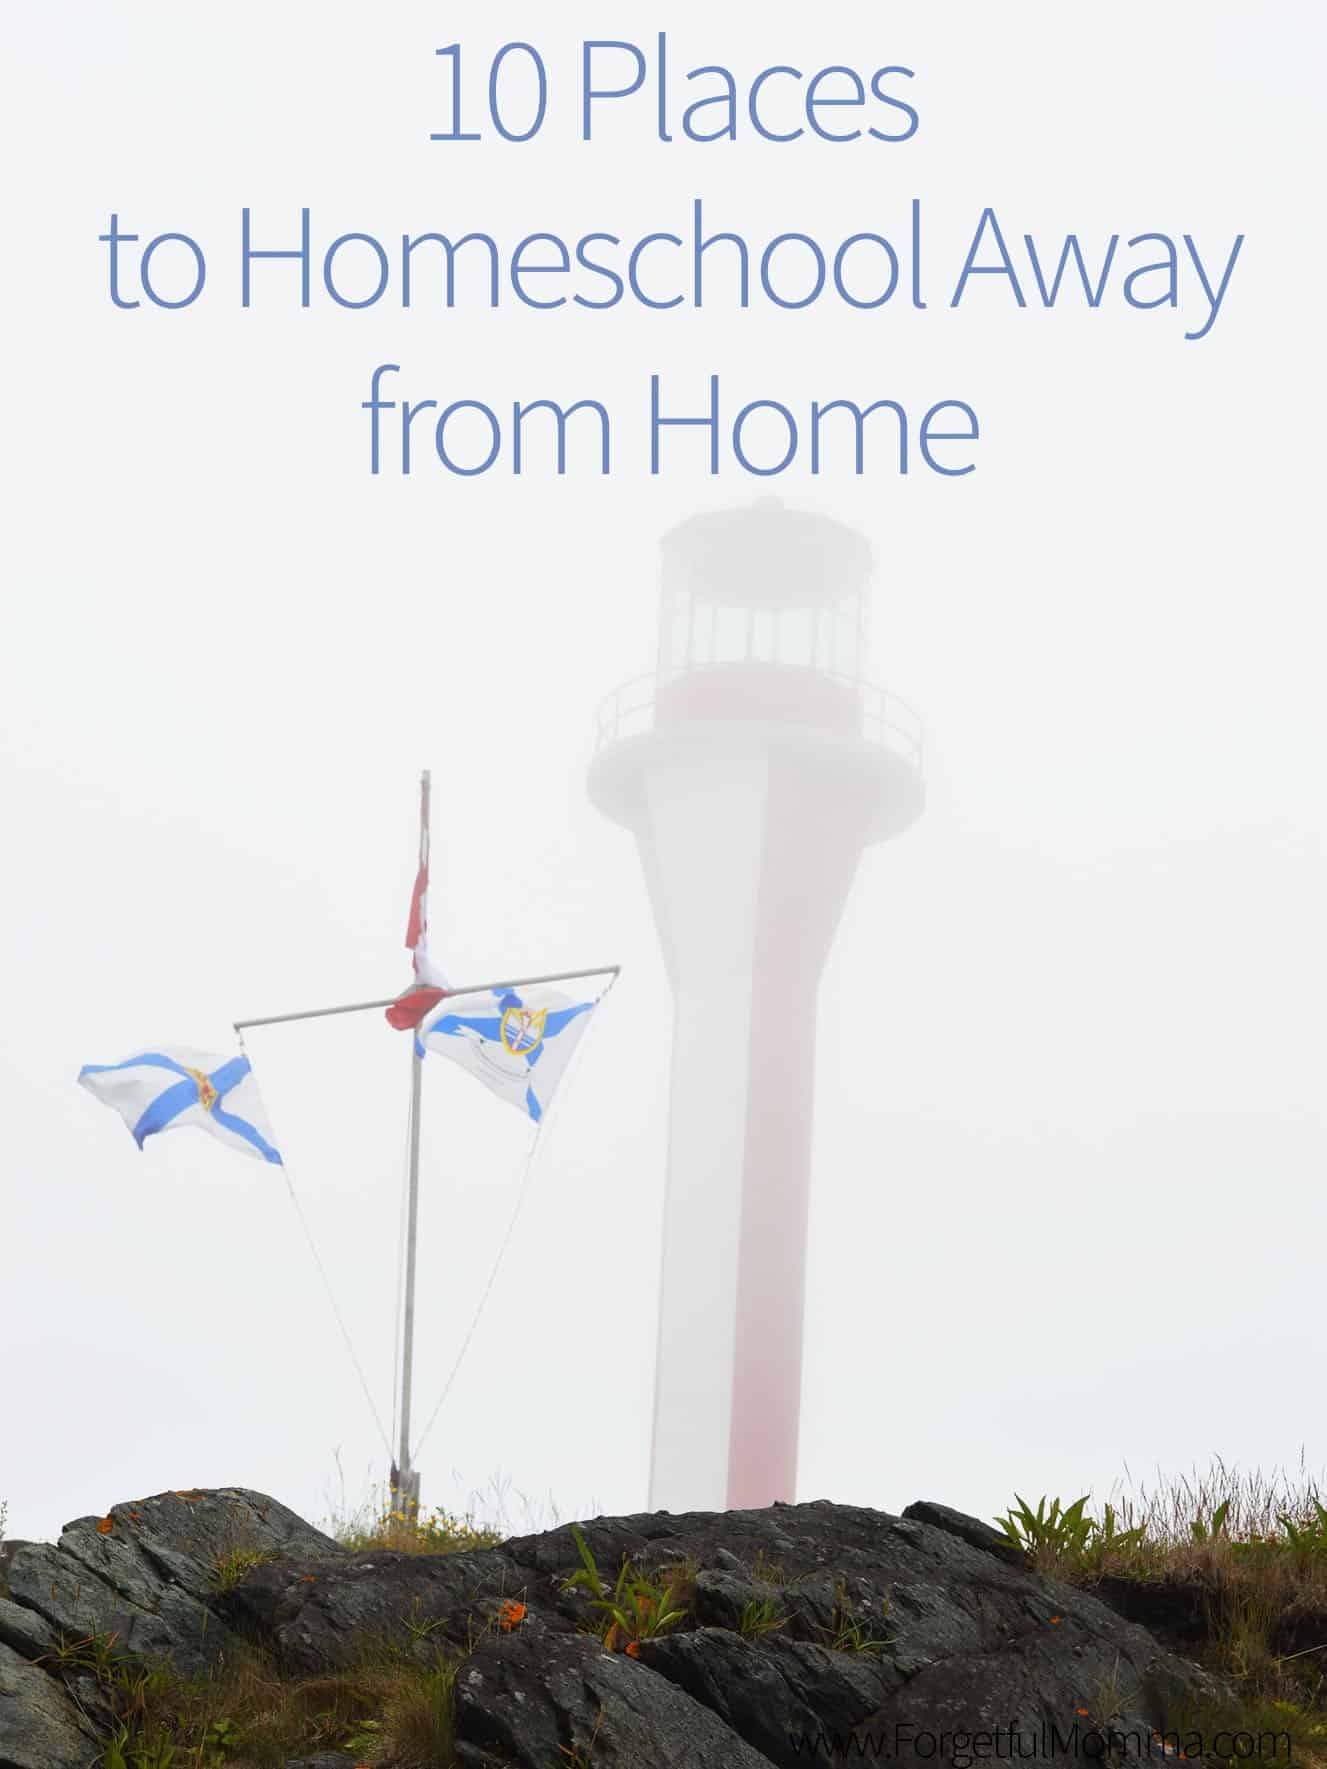 10 Places to Homeschool Away from Home